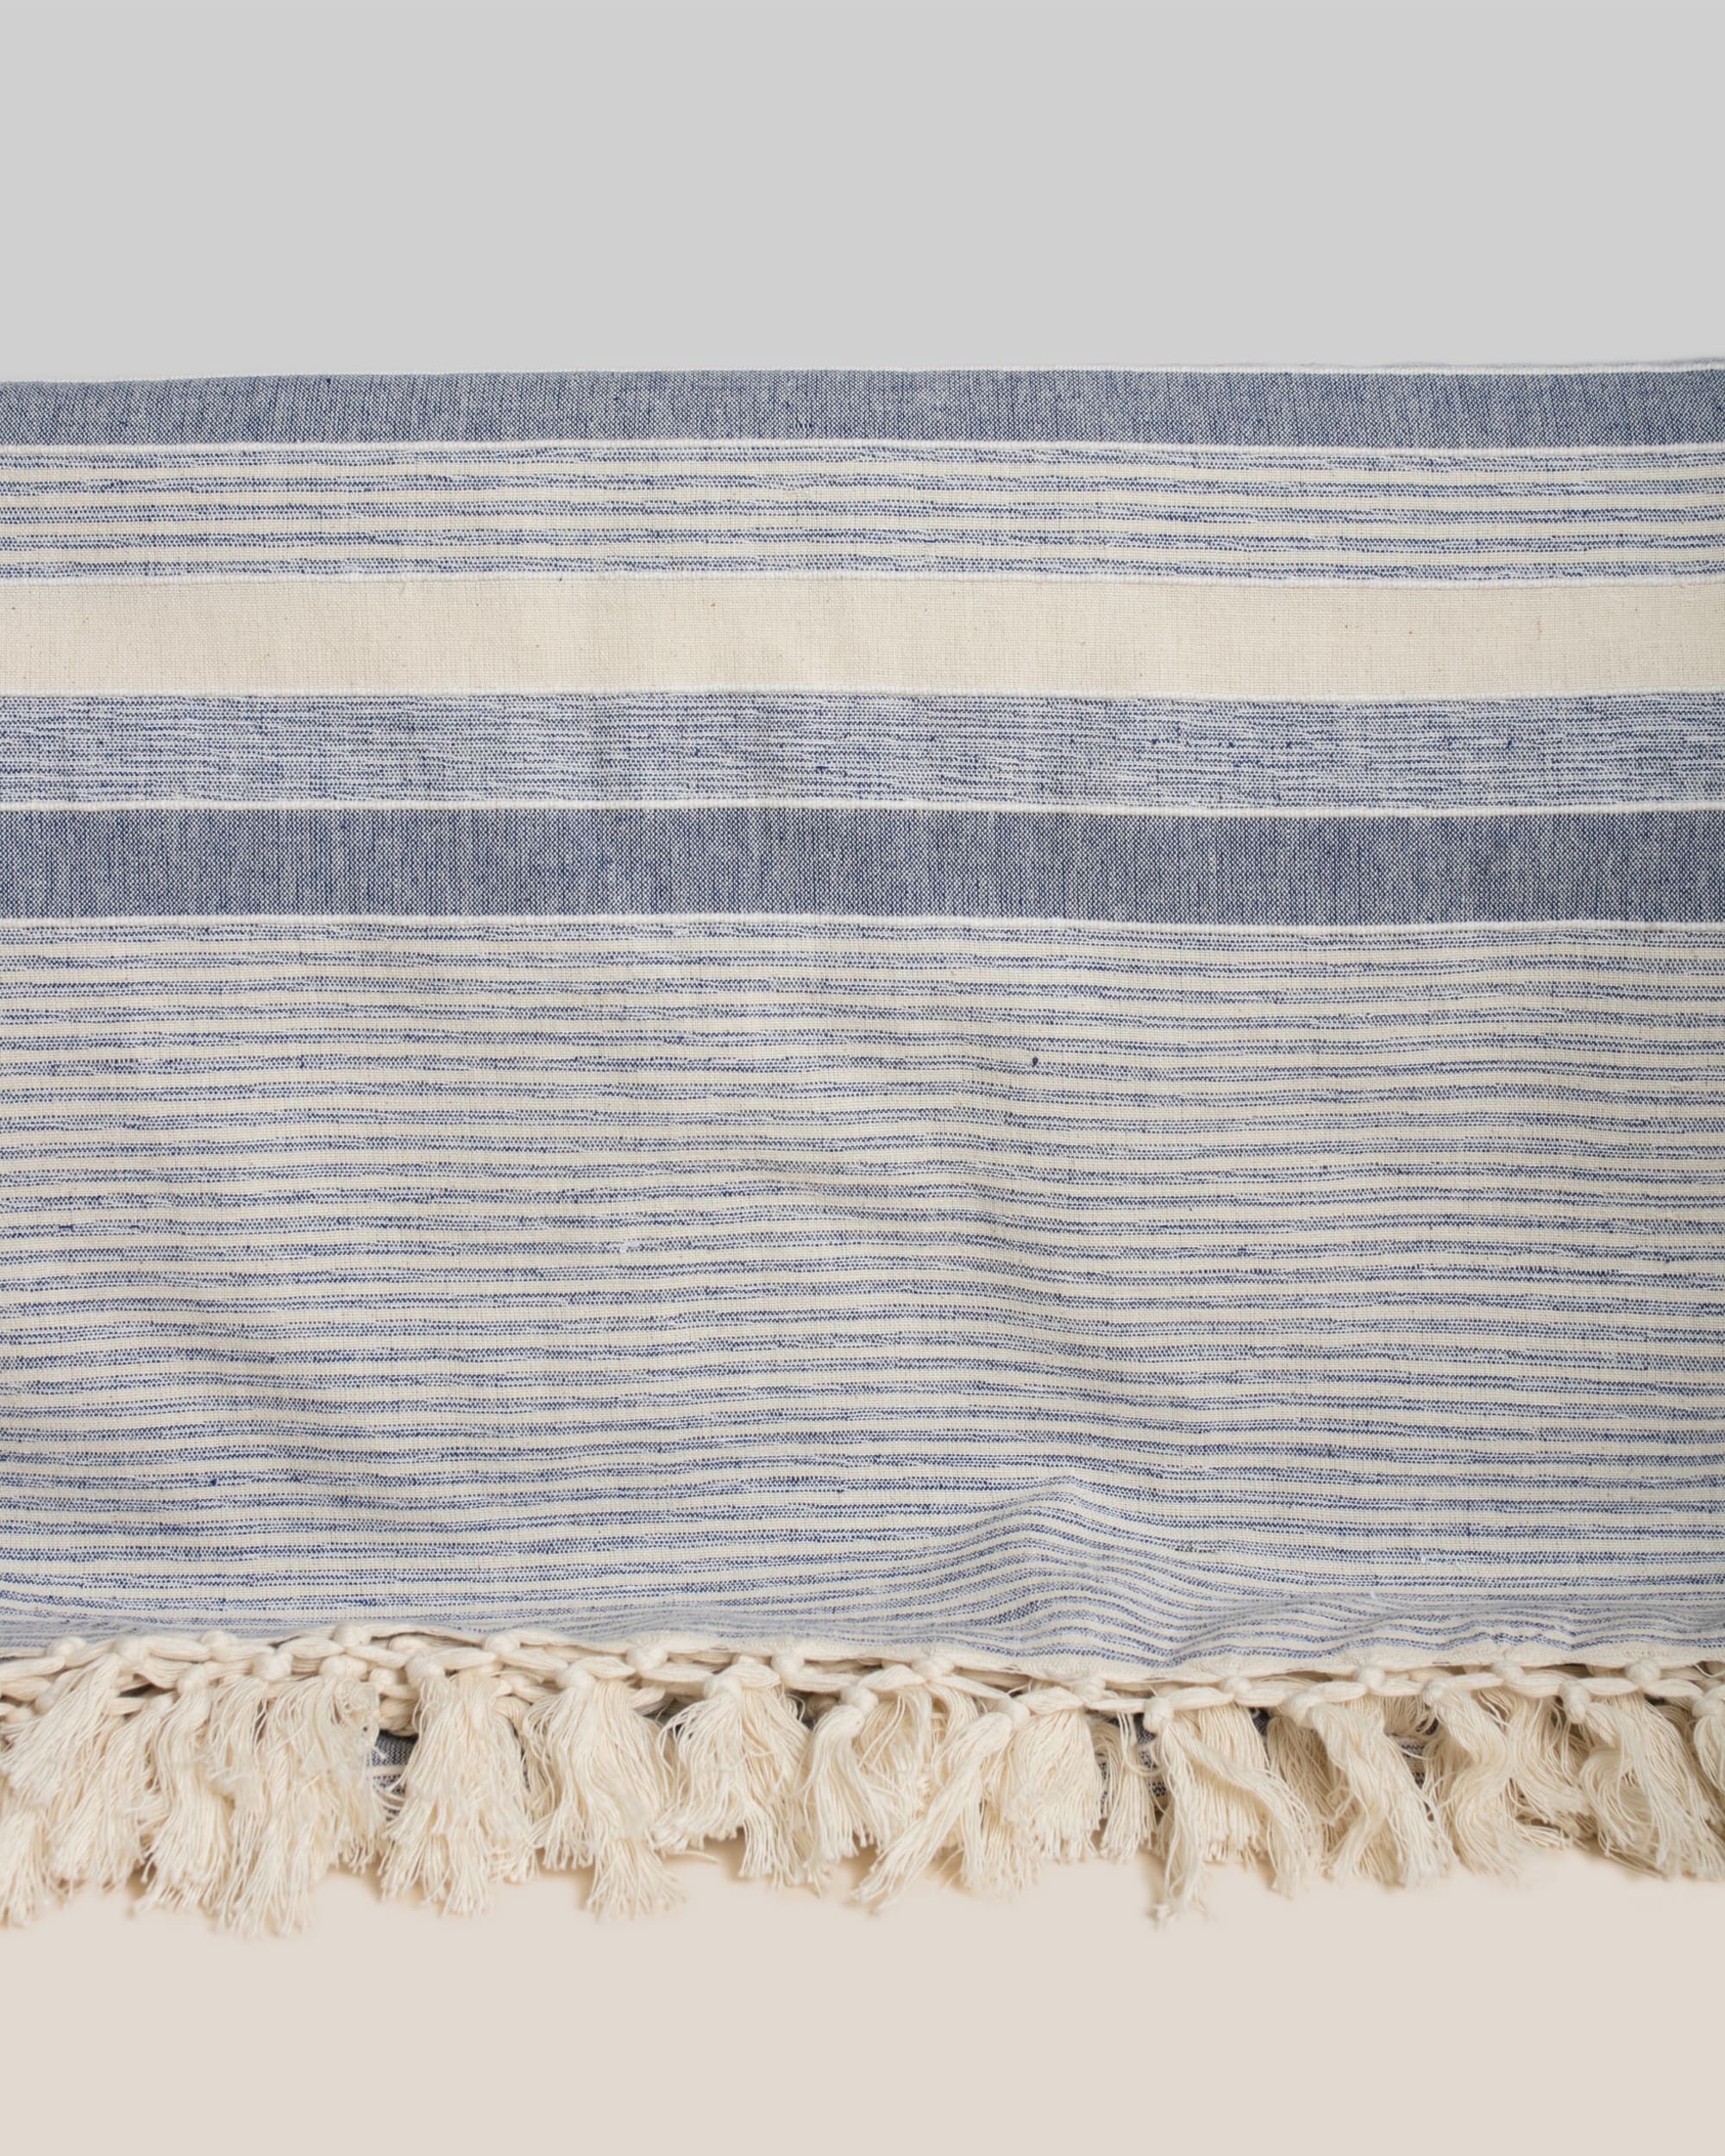 A Trouvé large woven striped textile with tassels